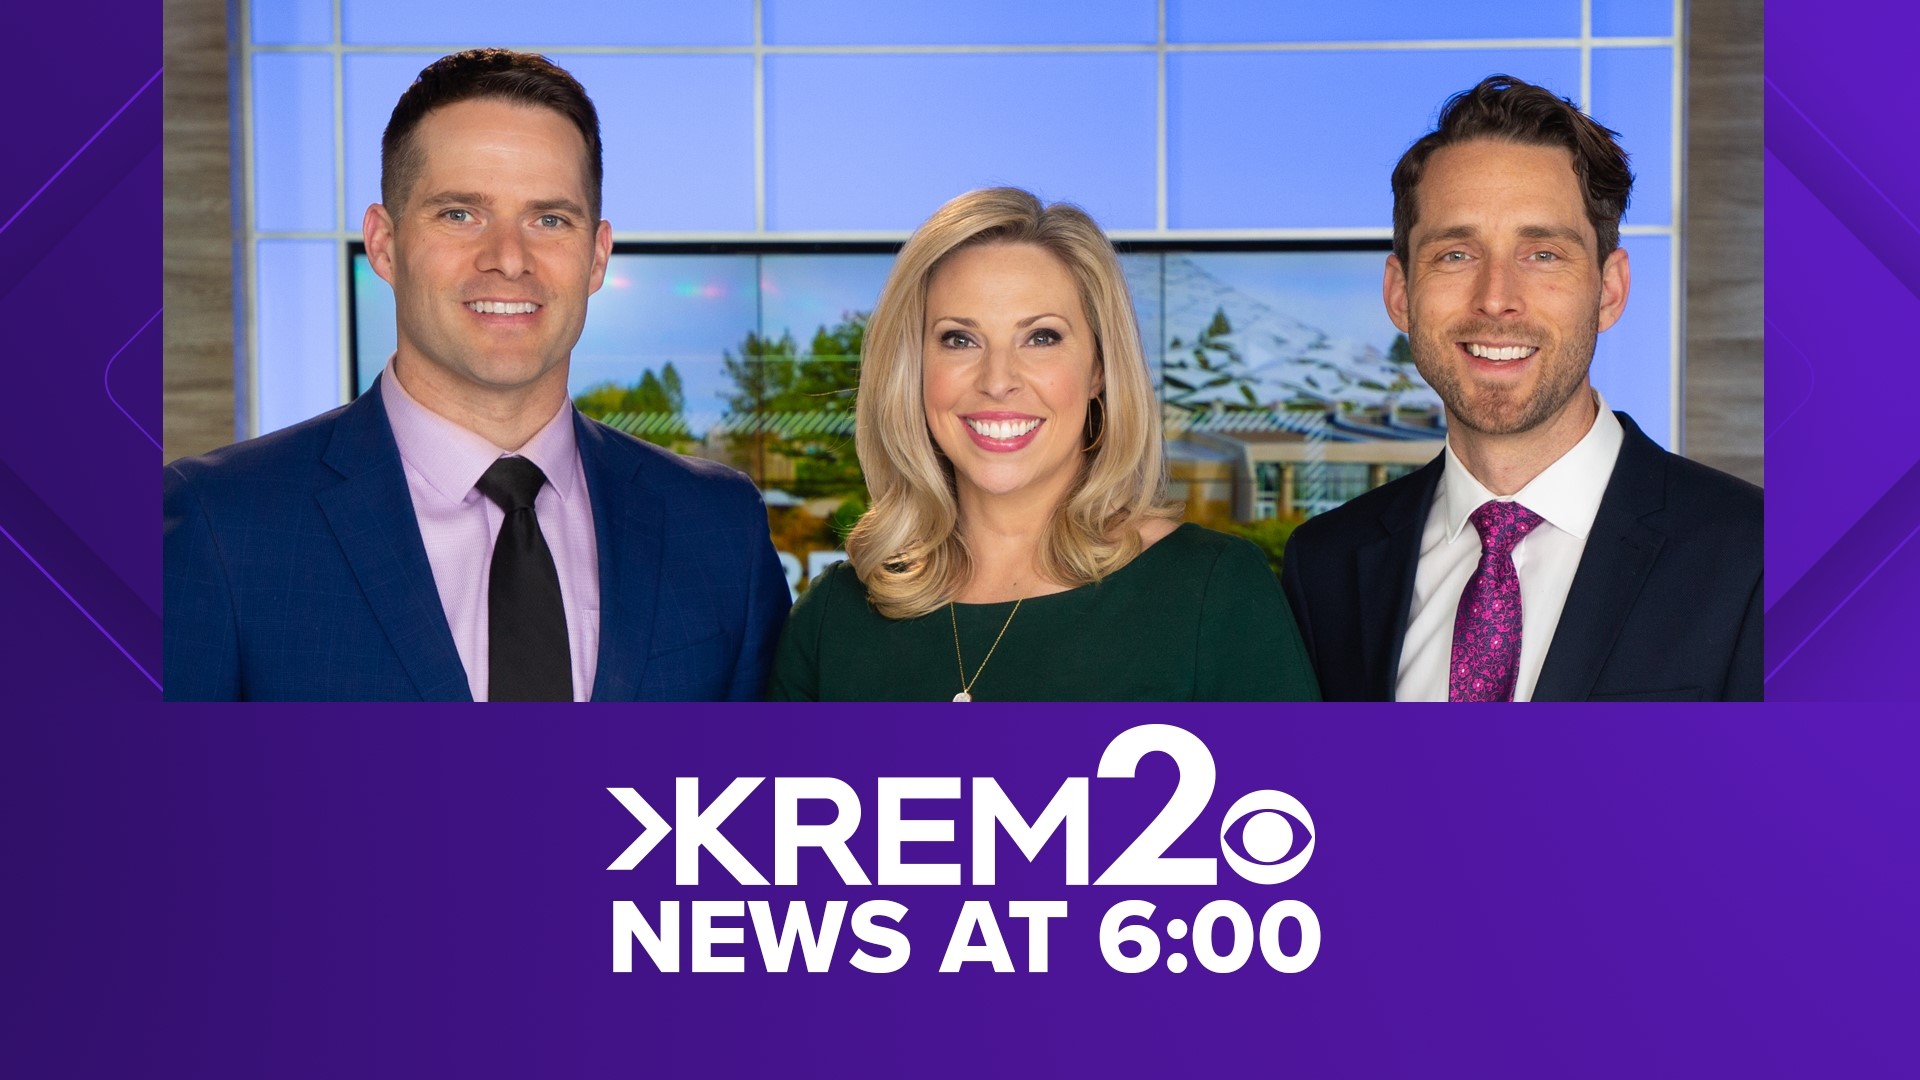 KREM 2 News takes an in-depth look at the day's biggest news in Spokane and the Inland Northwest, along with the latest weather and sports.